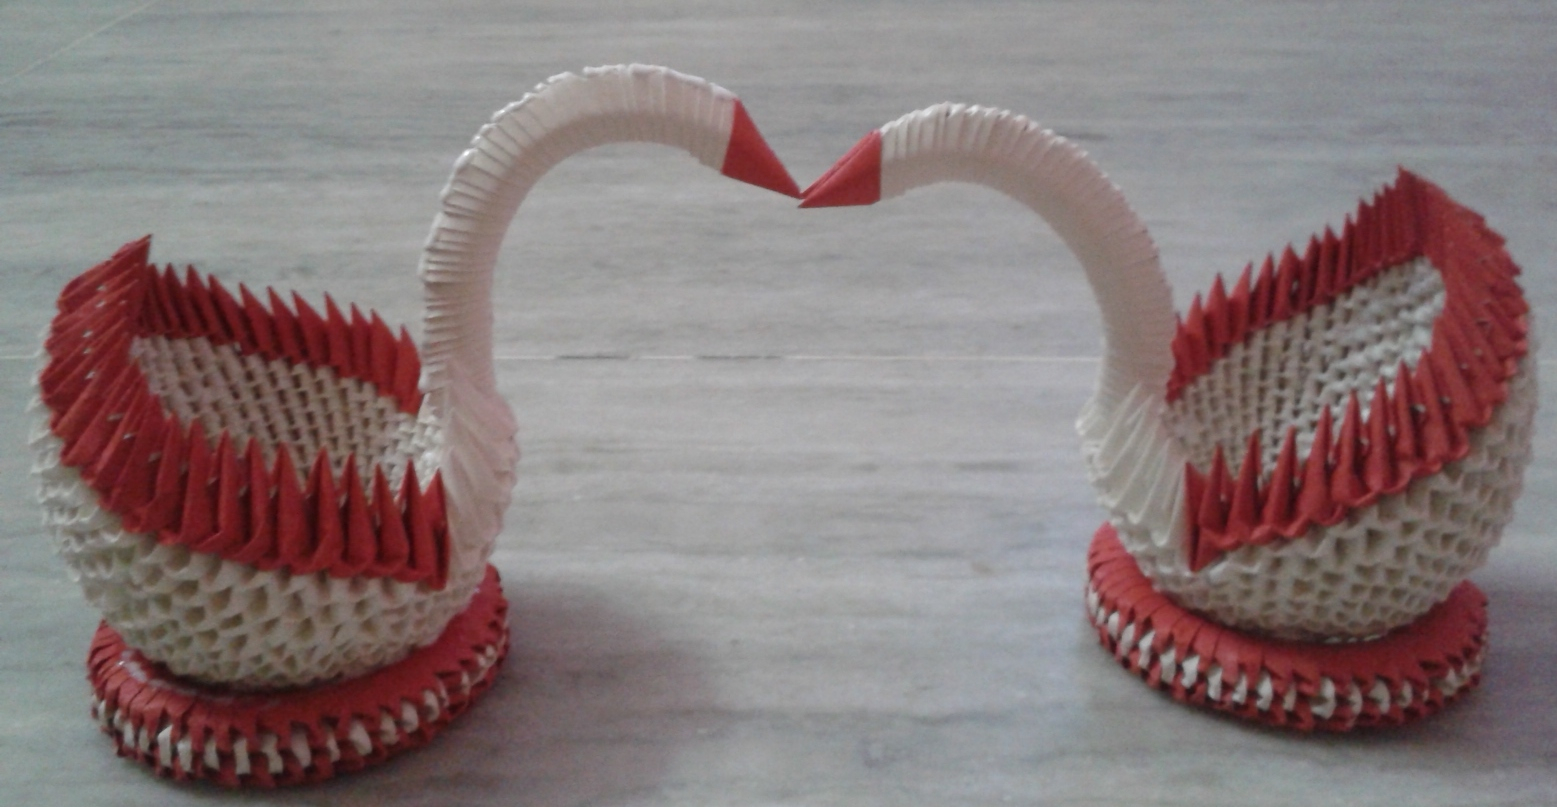 3D Origami Crafts Paper Craft Ideas 3d Origami Swan In Red And White Combination